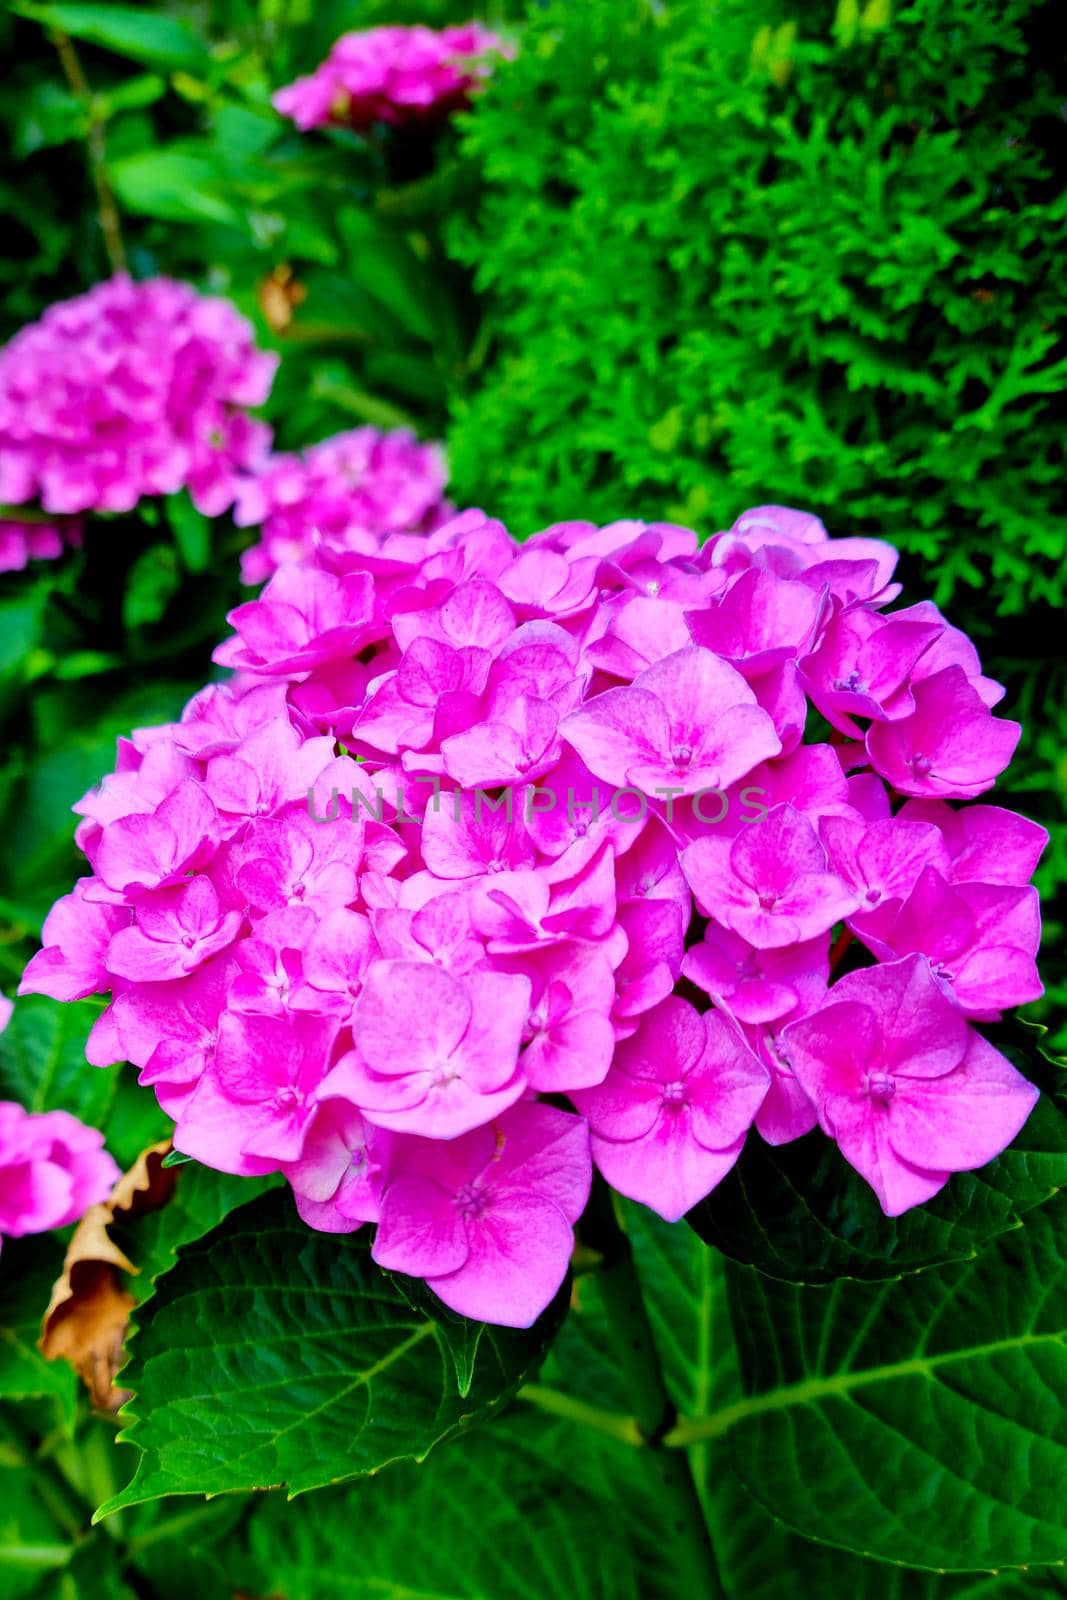 Close-up of hydrangeas blooming in the park in the spring. by kip02kas